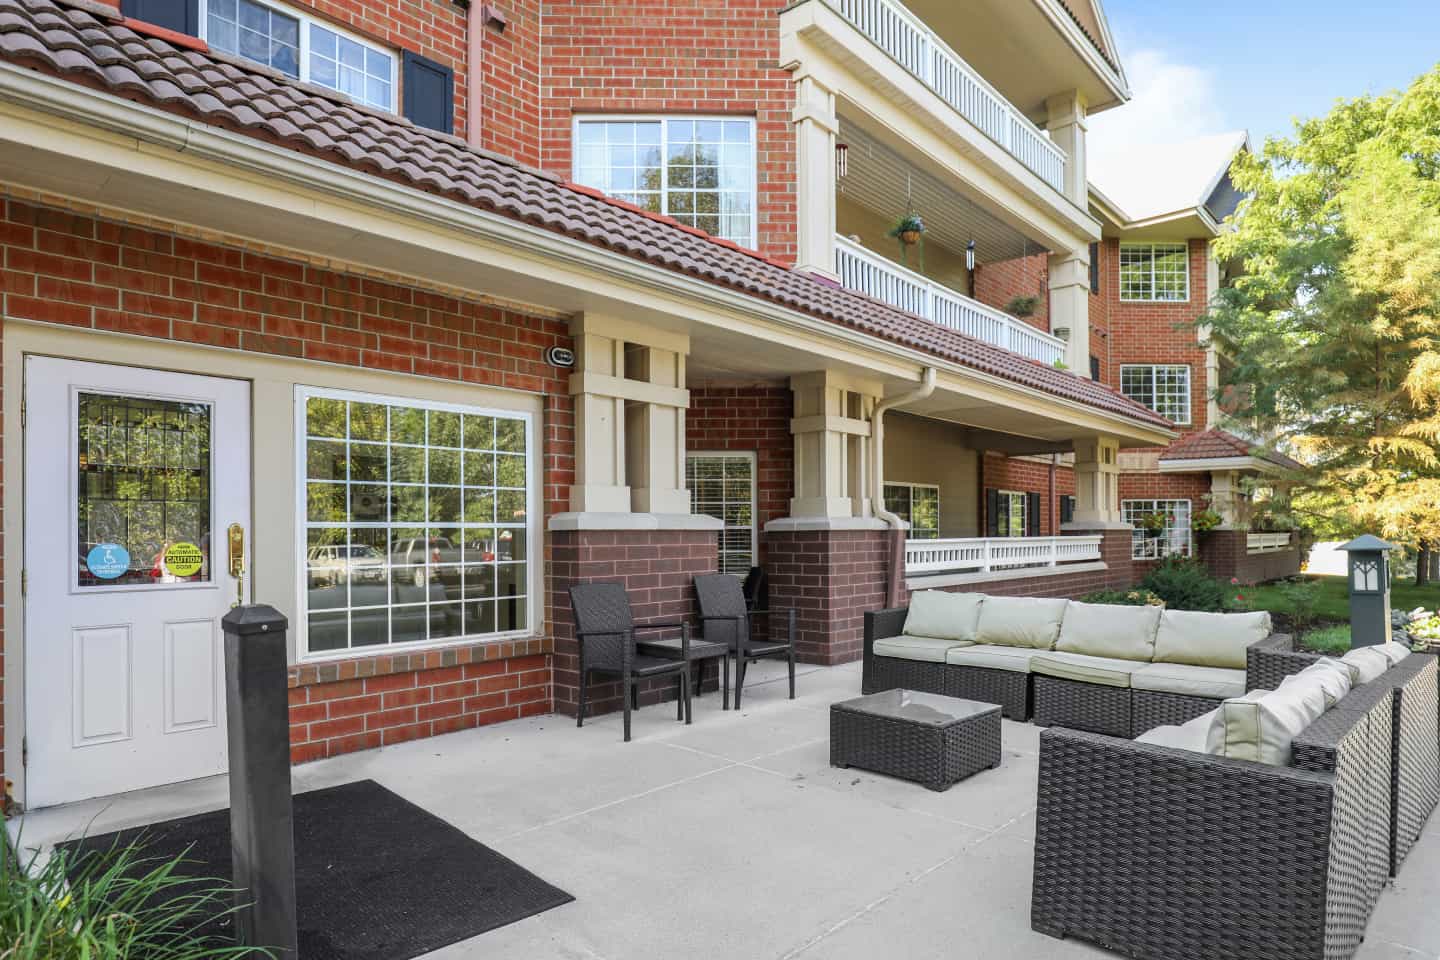 Assisted Living Patio